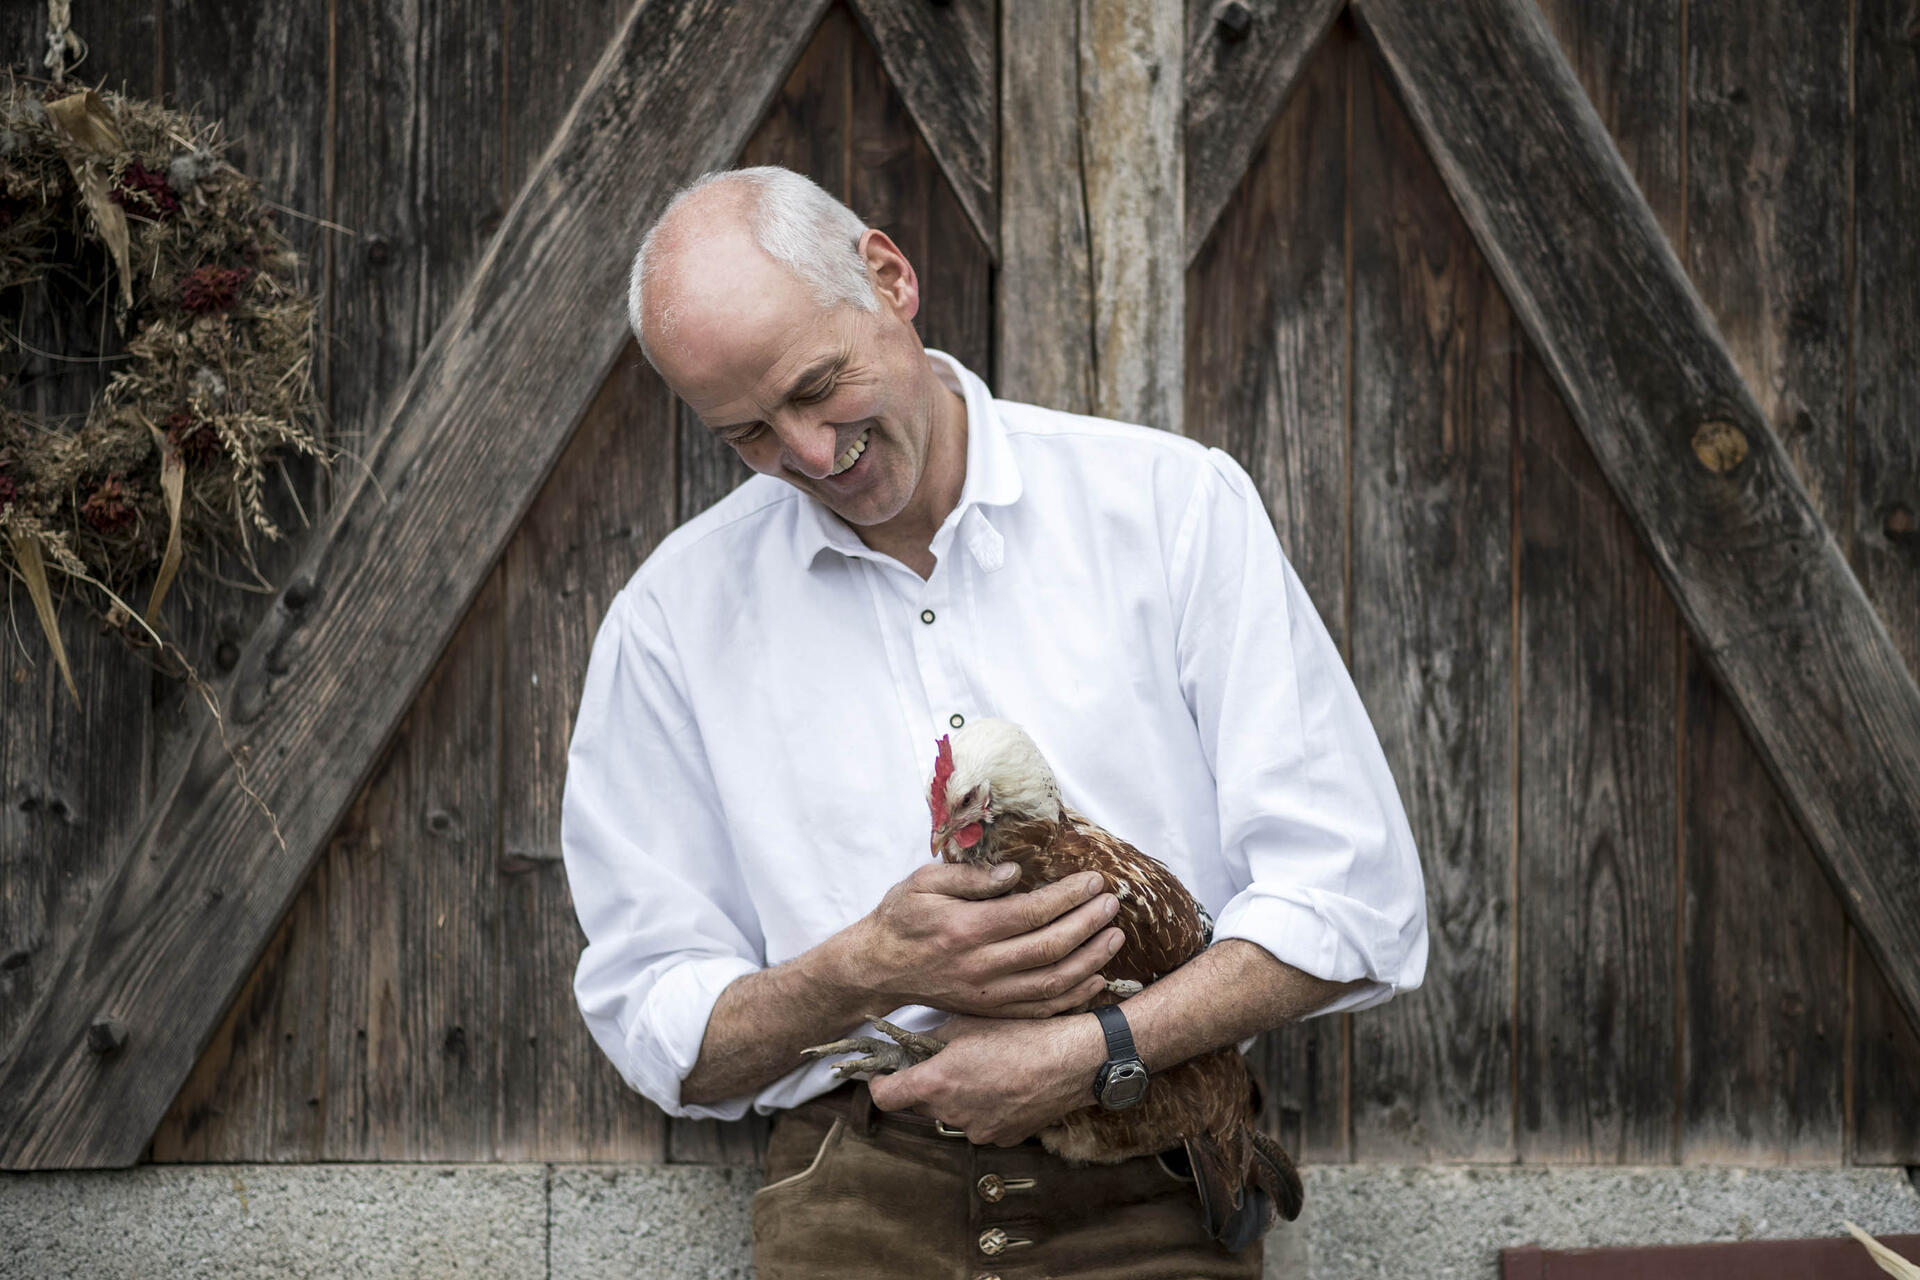 Farmer with chicken in his arms